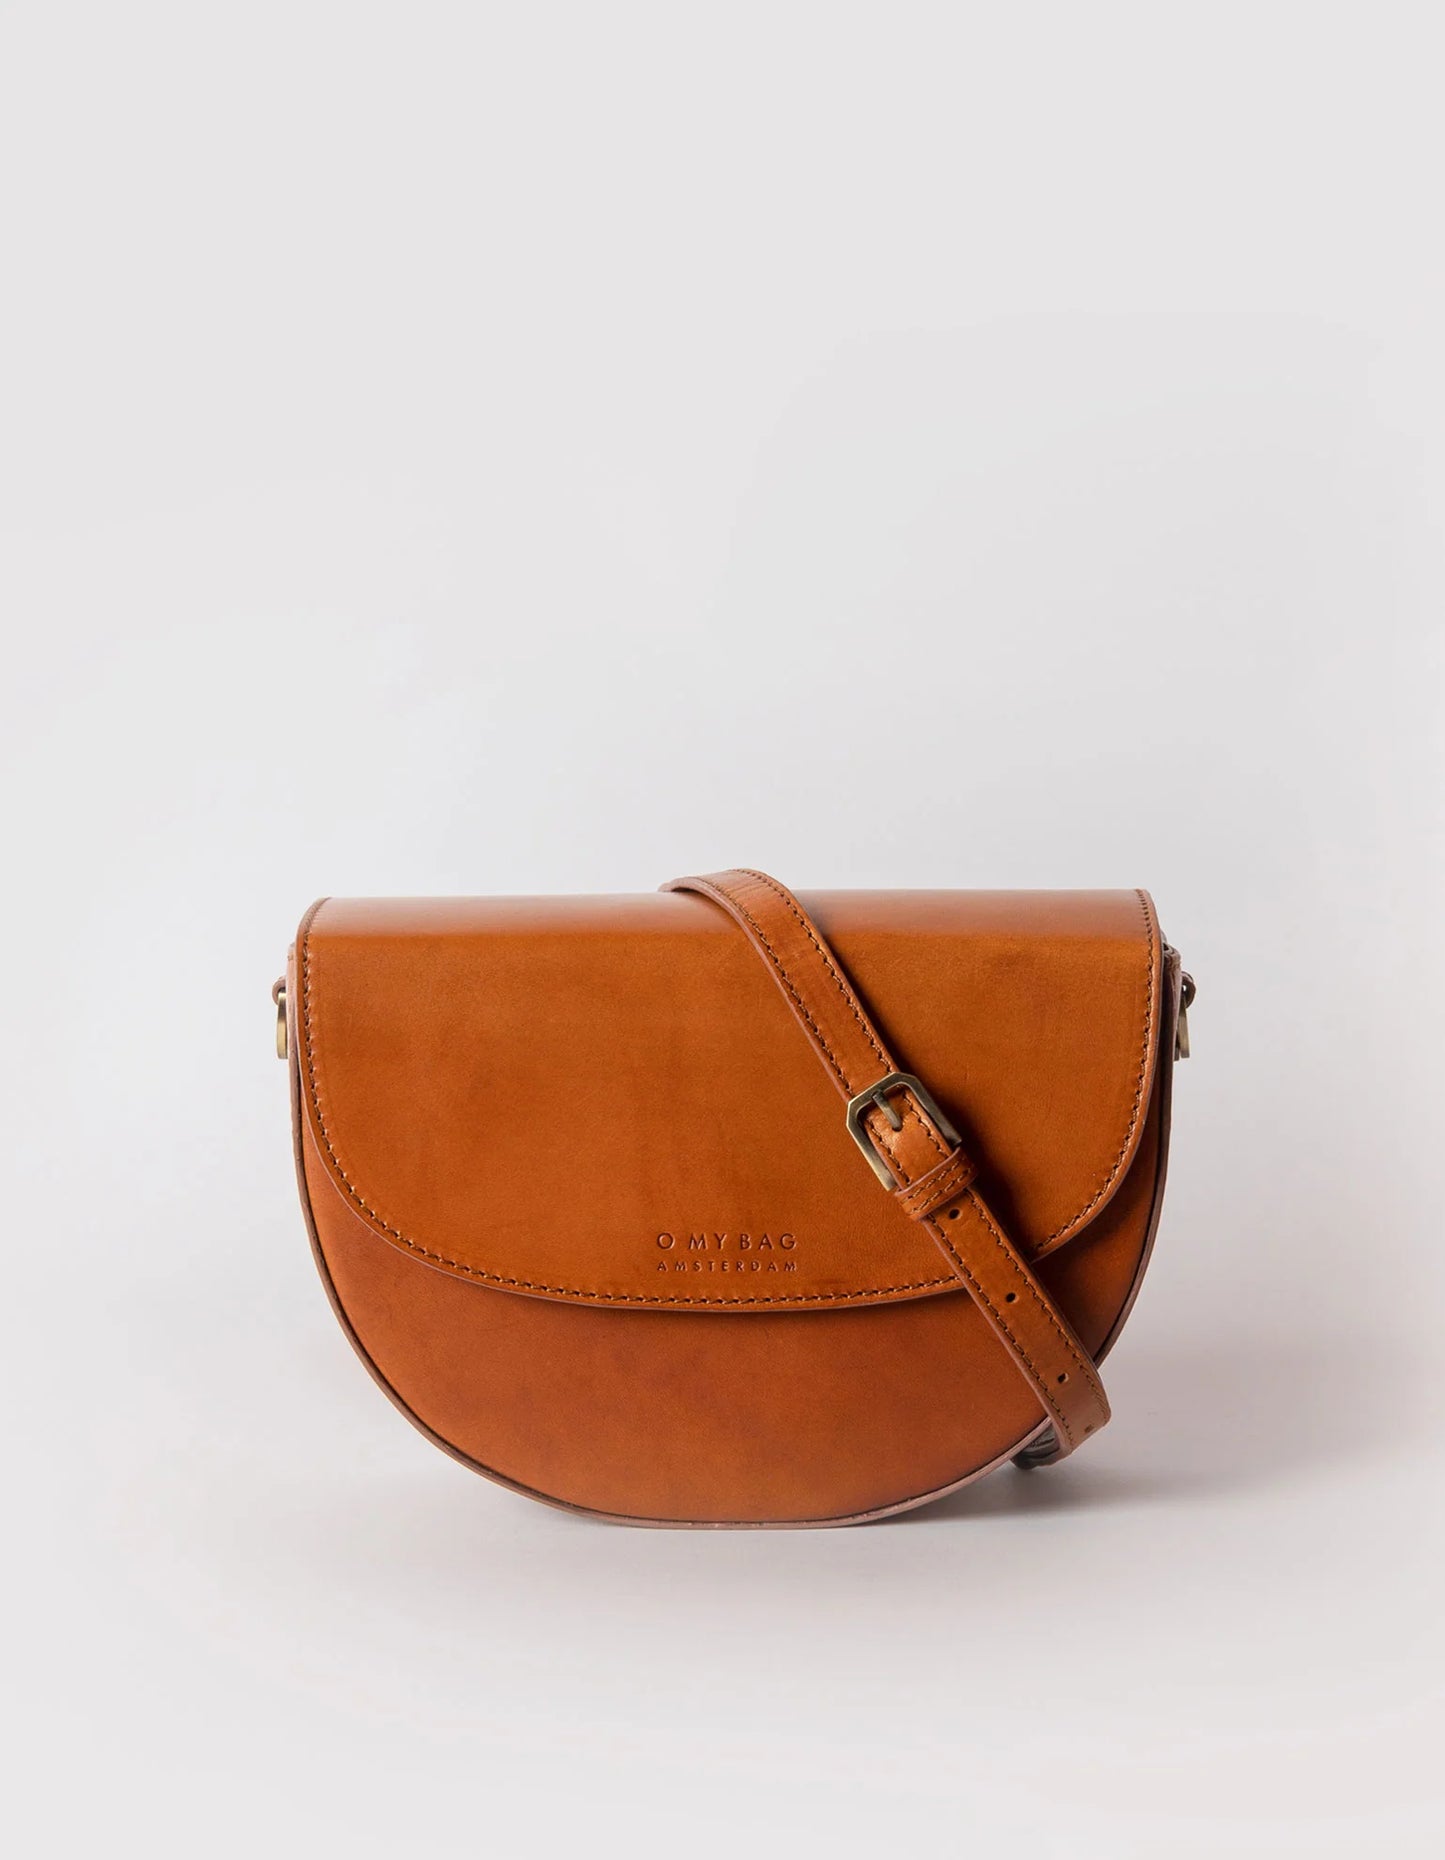 Leather Bag Ava - Cognac Classic Leather (Two Straps)